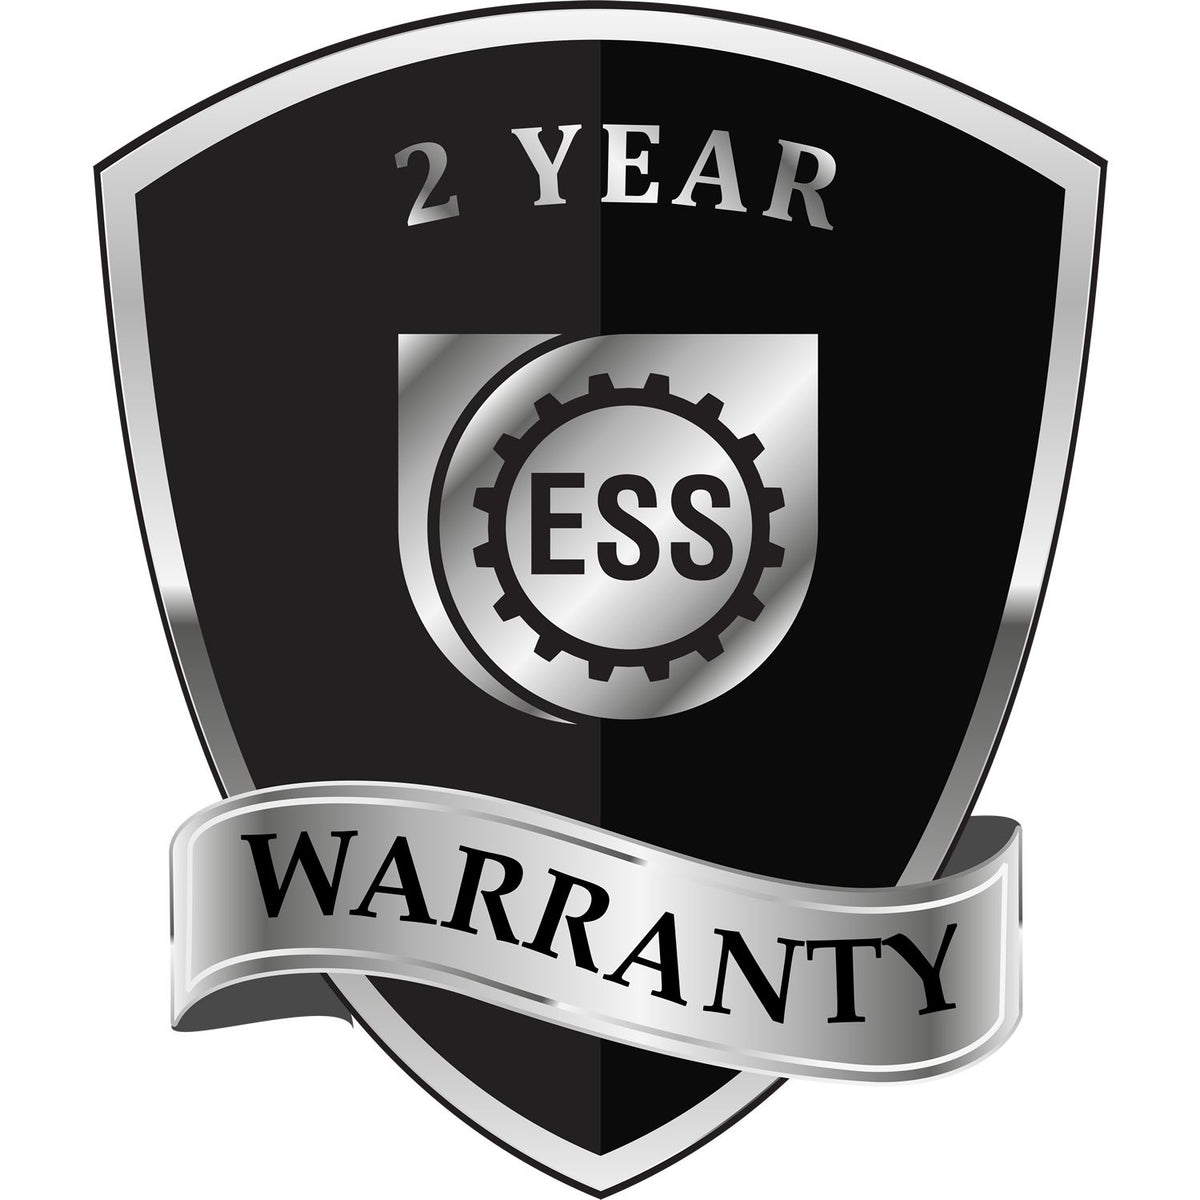 A black and silver badge or emblem showing warranty information for the Soft Michigan Professional Geologist Seal